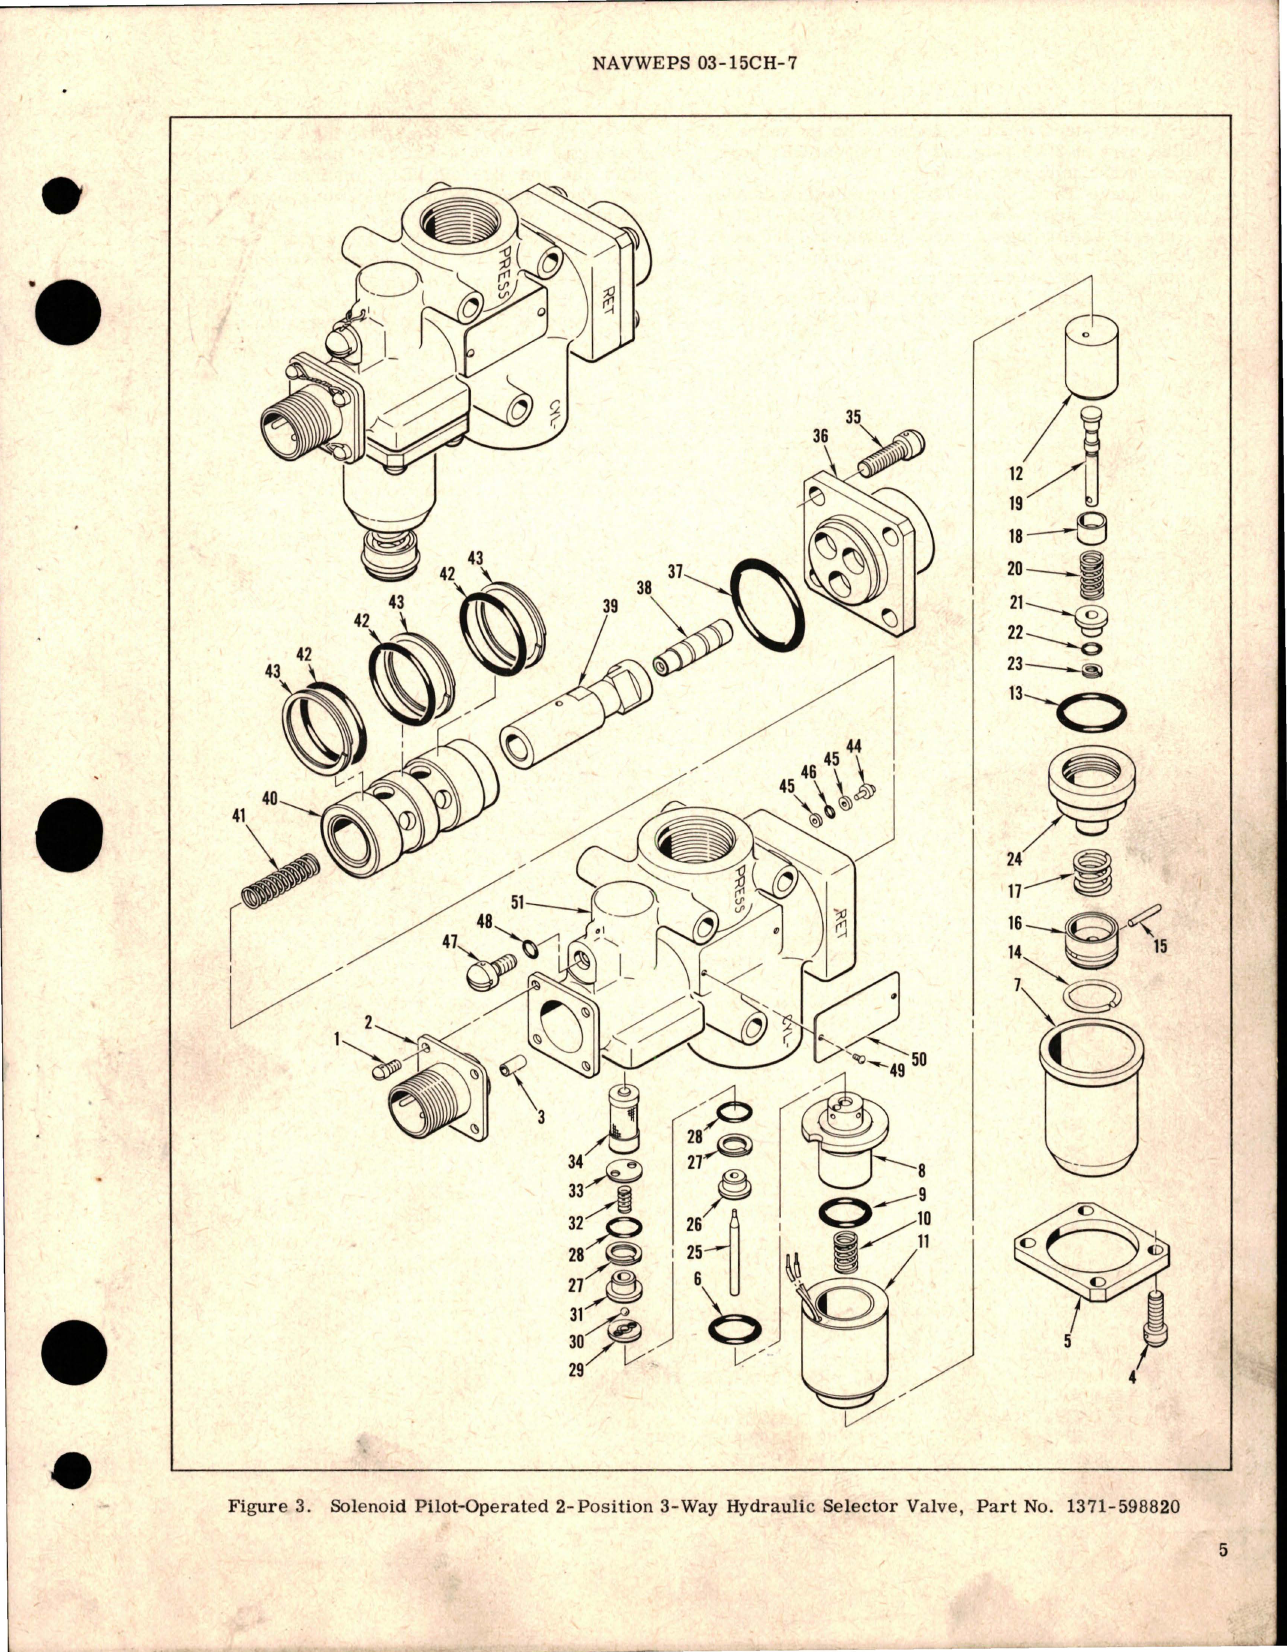 Sample page 5 from AirCorps Library document: Overhaul Instructions with Parts for Solenoid Pilot Operated 2 Position 3 Way Hydraulic Selector Valve - Part 1371-598820